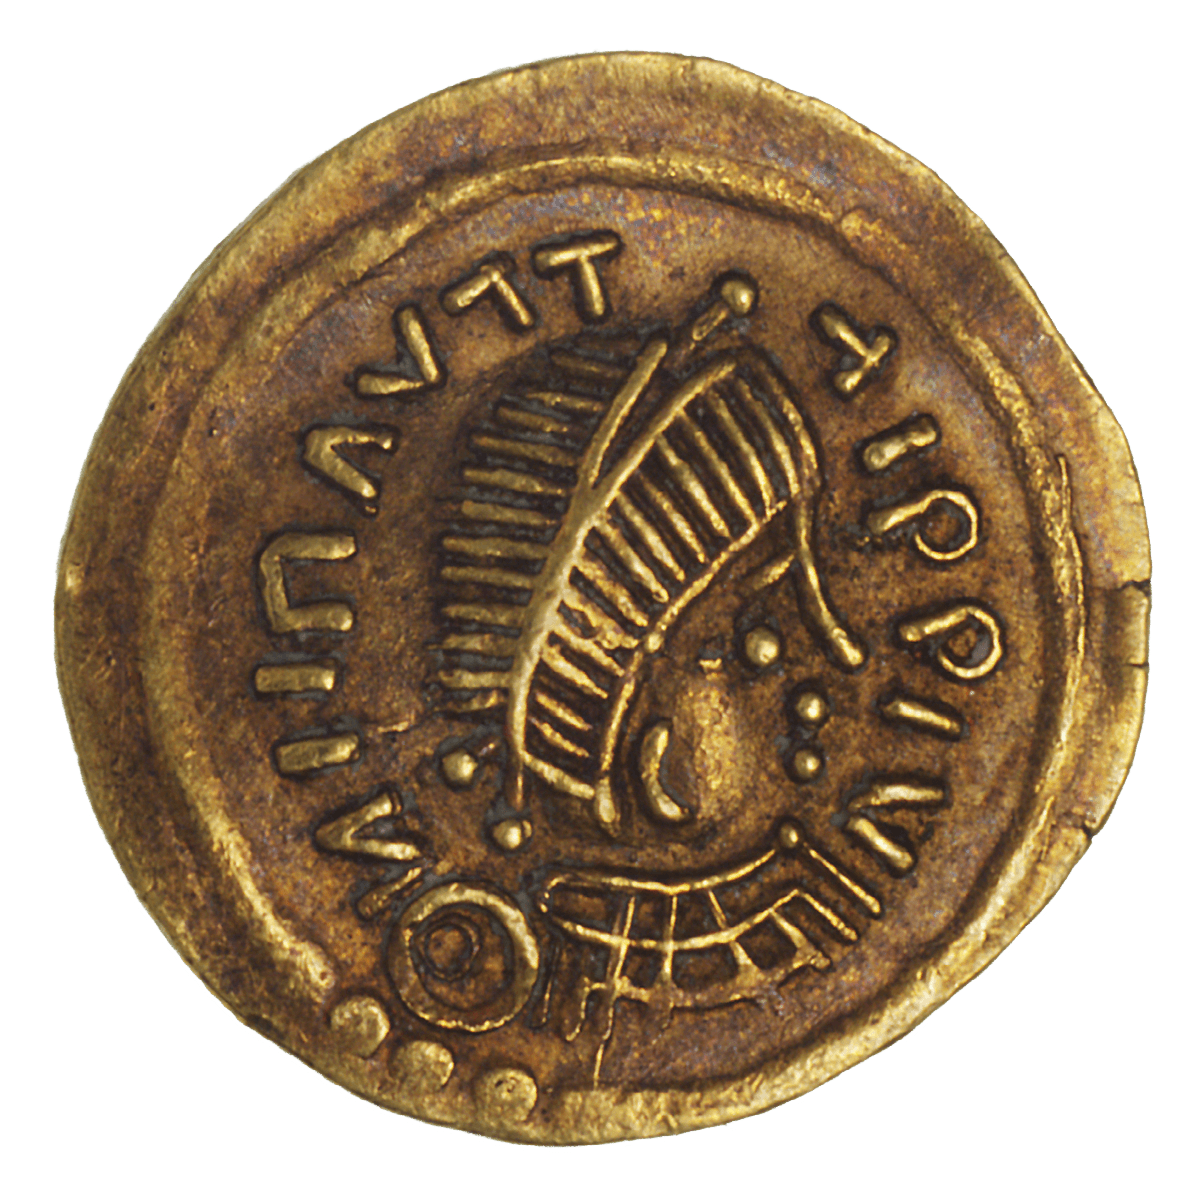 Kingdom of the Lombards, Perctarit, Tremissis (obverse)